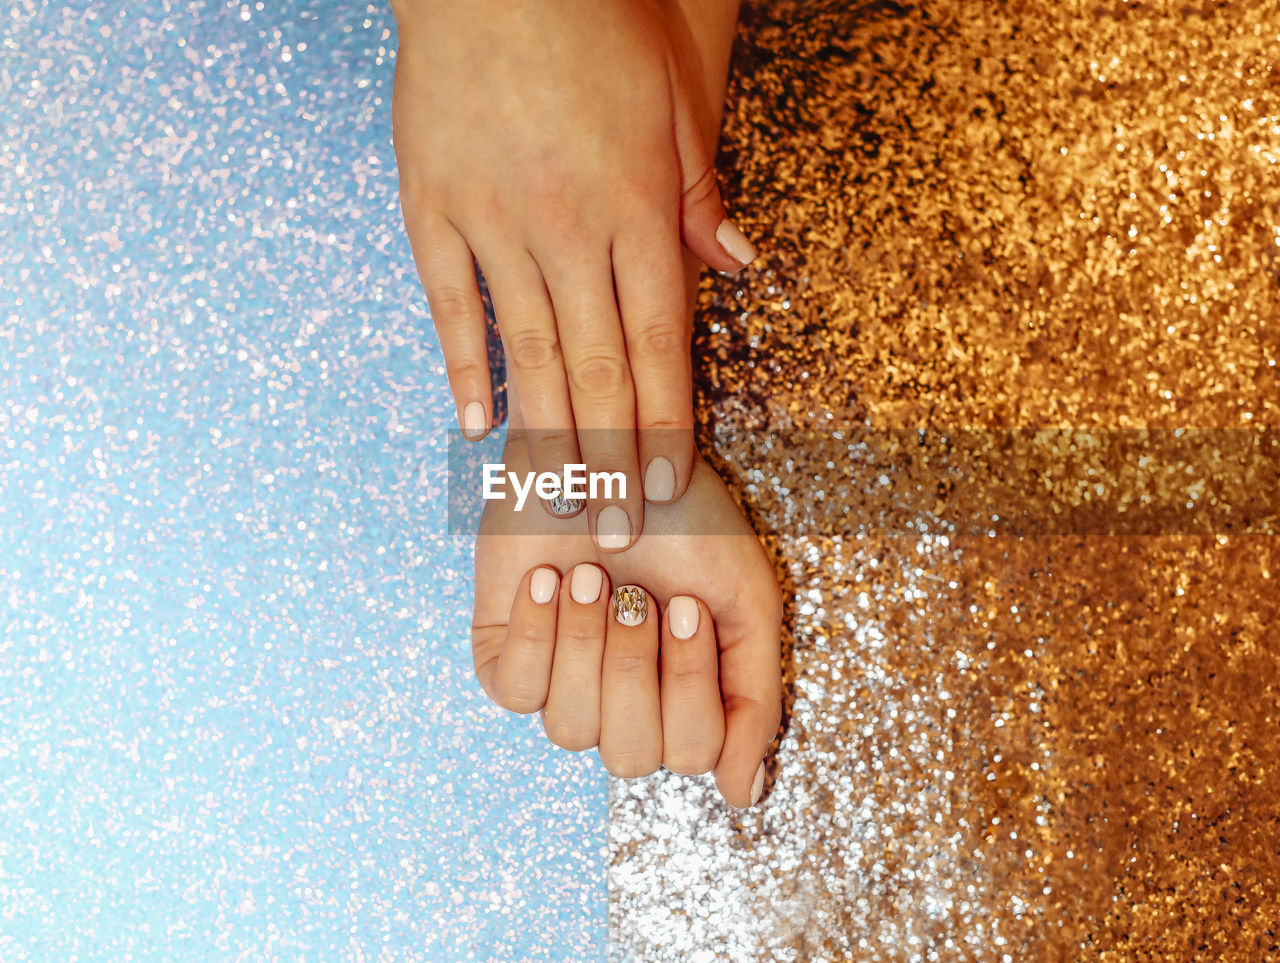 Cropped hands of woman with glitter